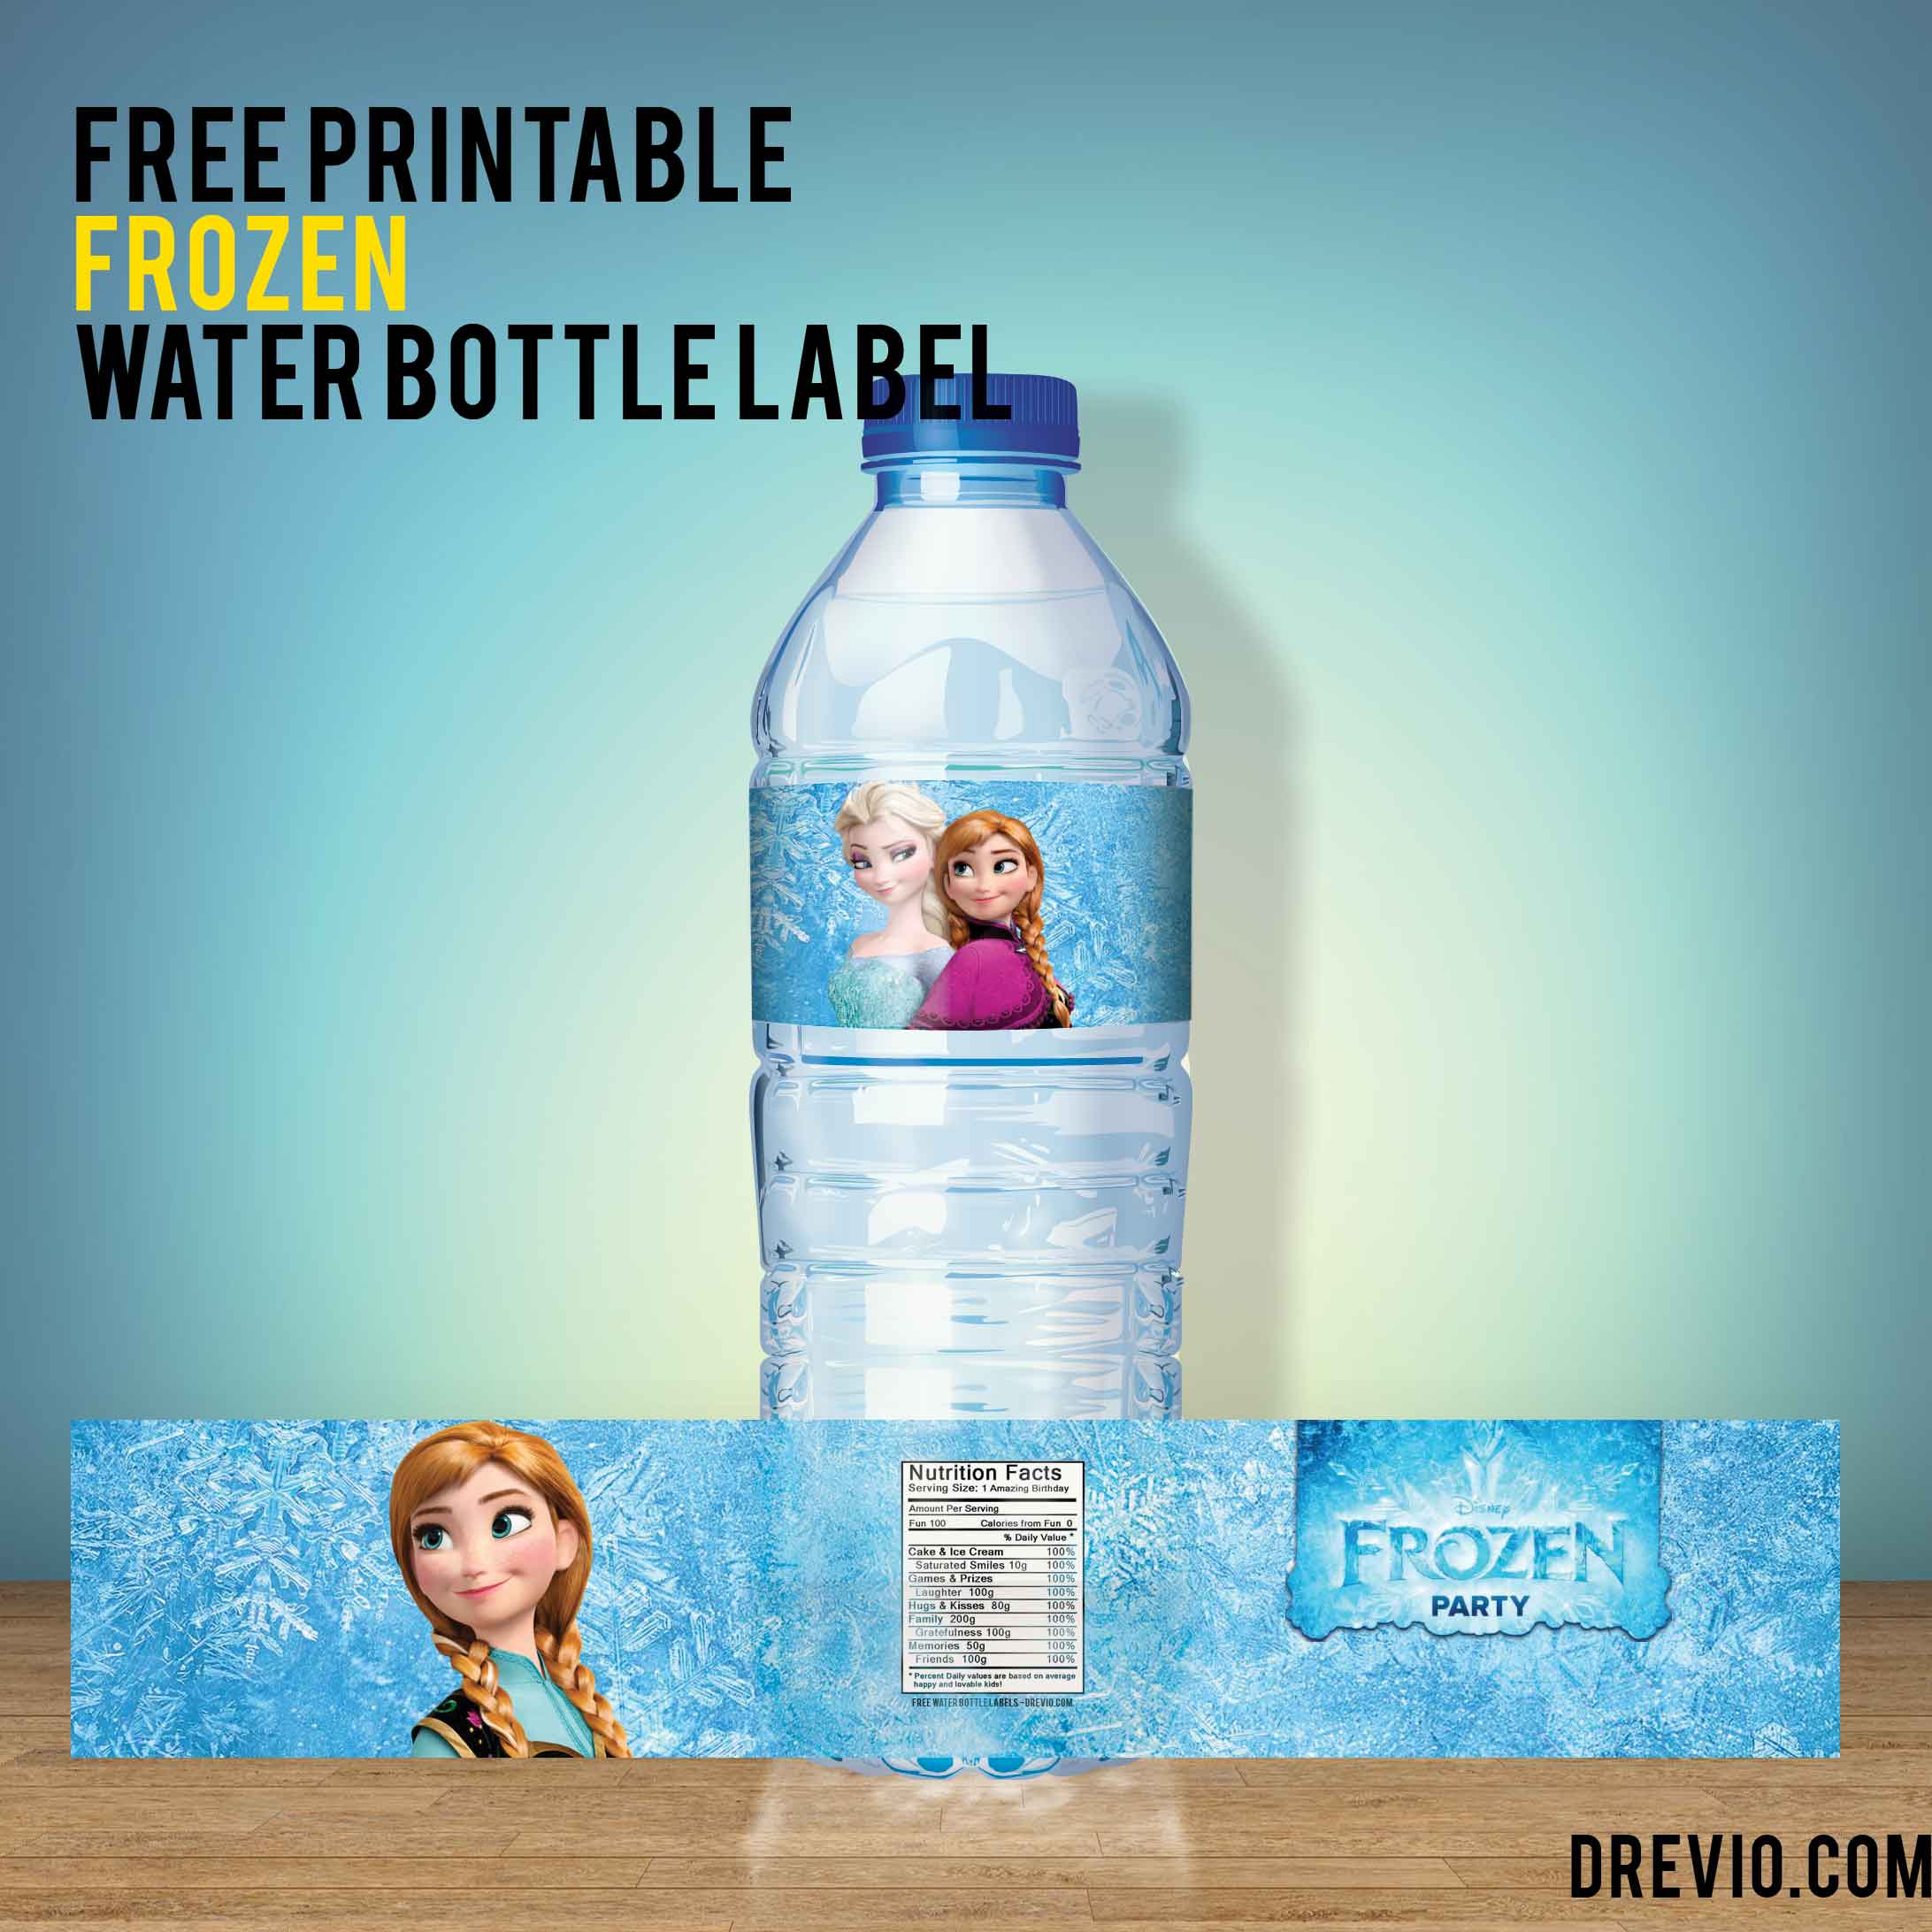 FREE-Printable-Frozen-Bottle-Label-Anna-and-Elsa-Preview